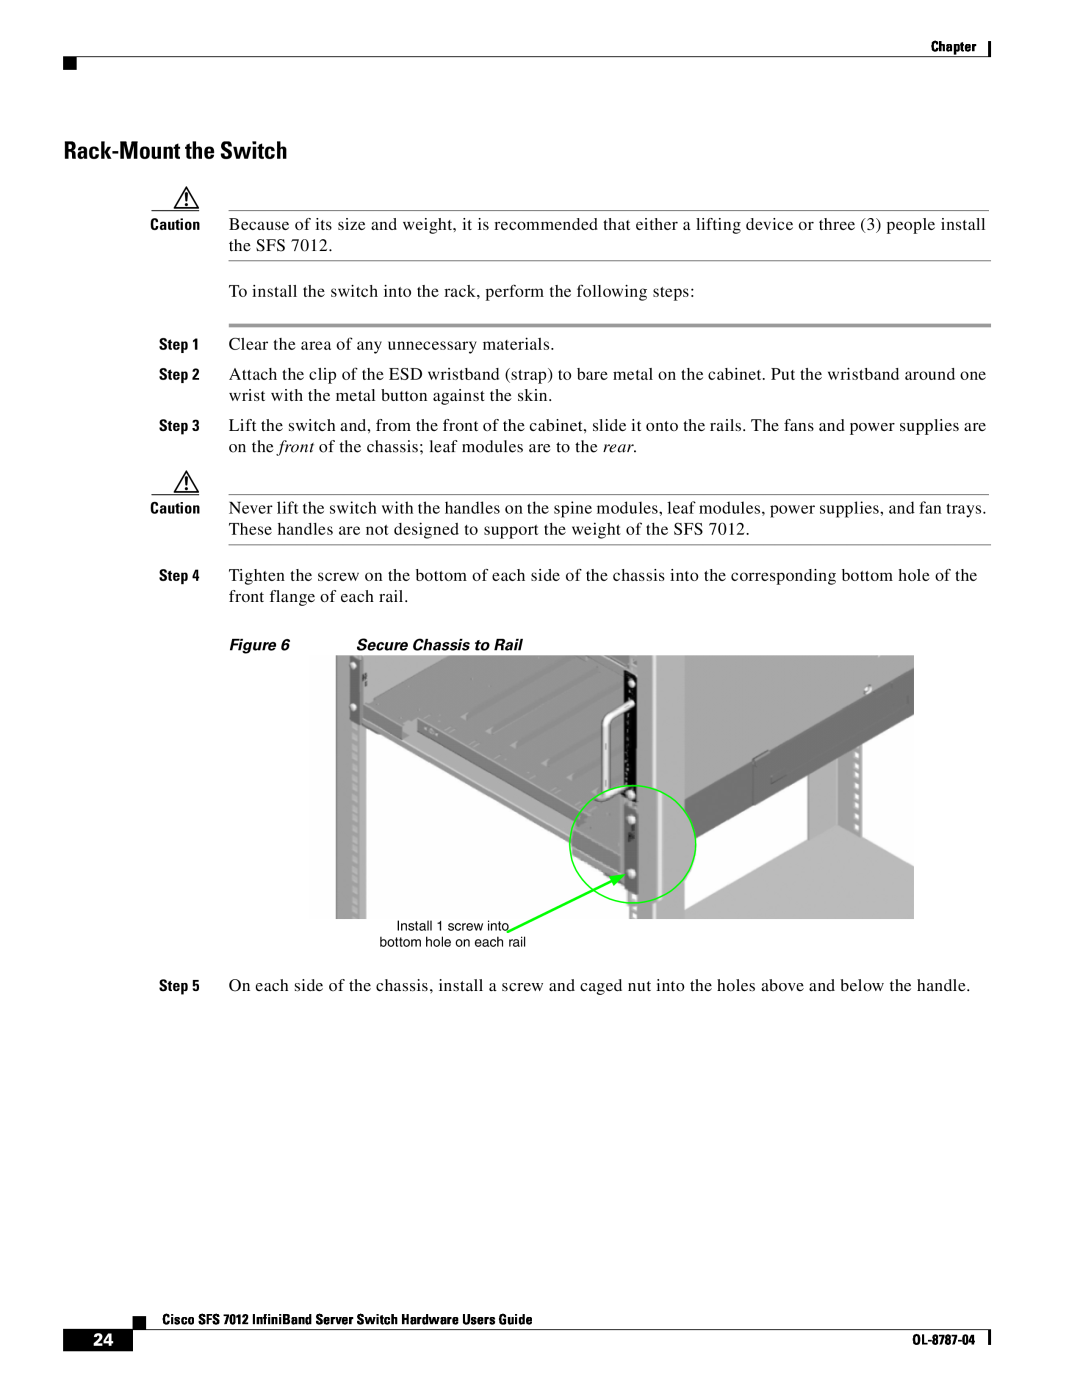 Cisco Systems SFS 7012 manual Rack-Mount the Switch 